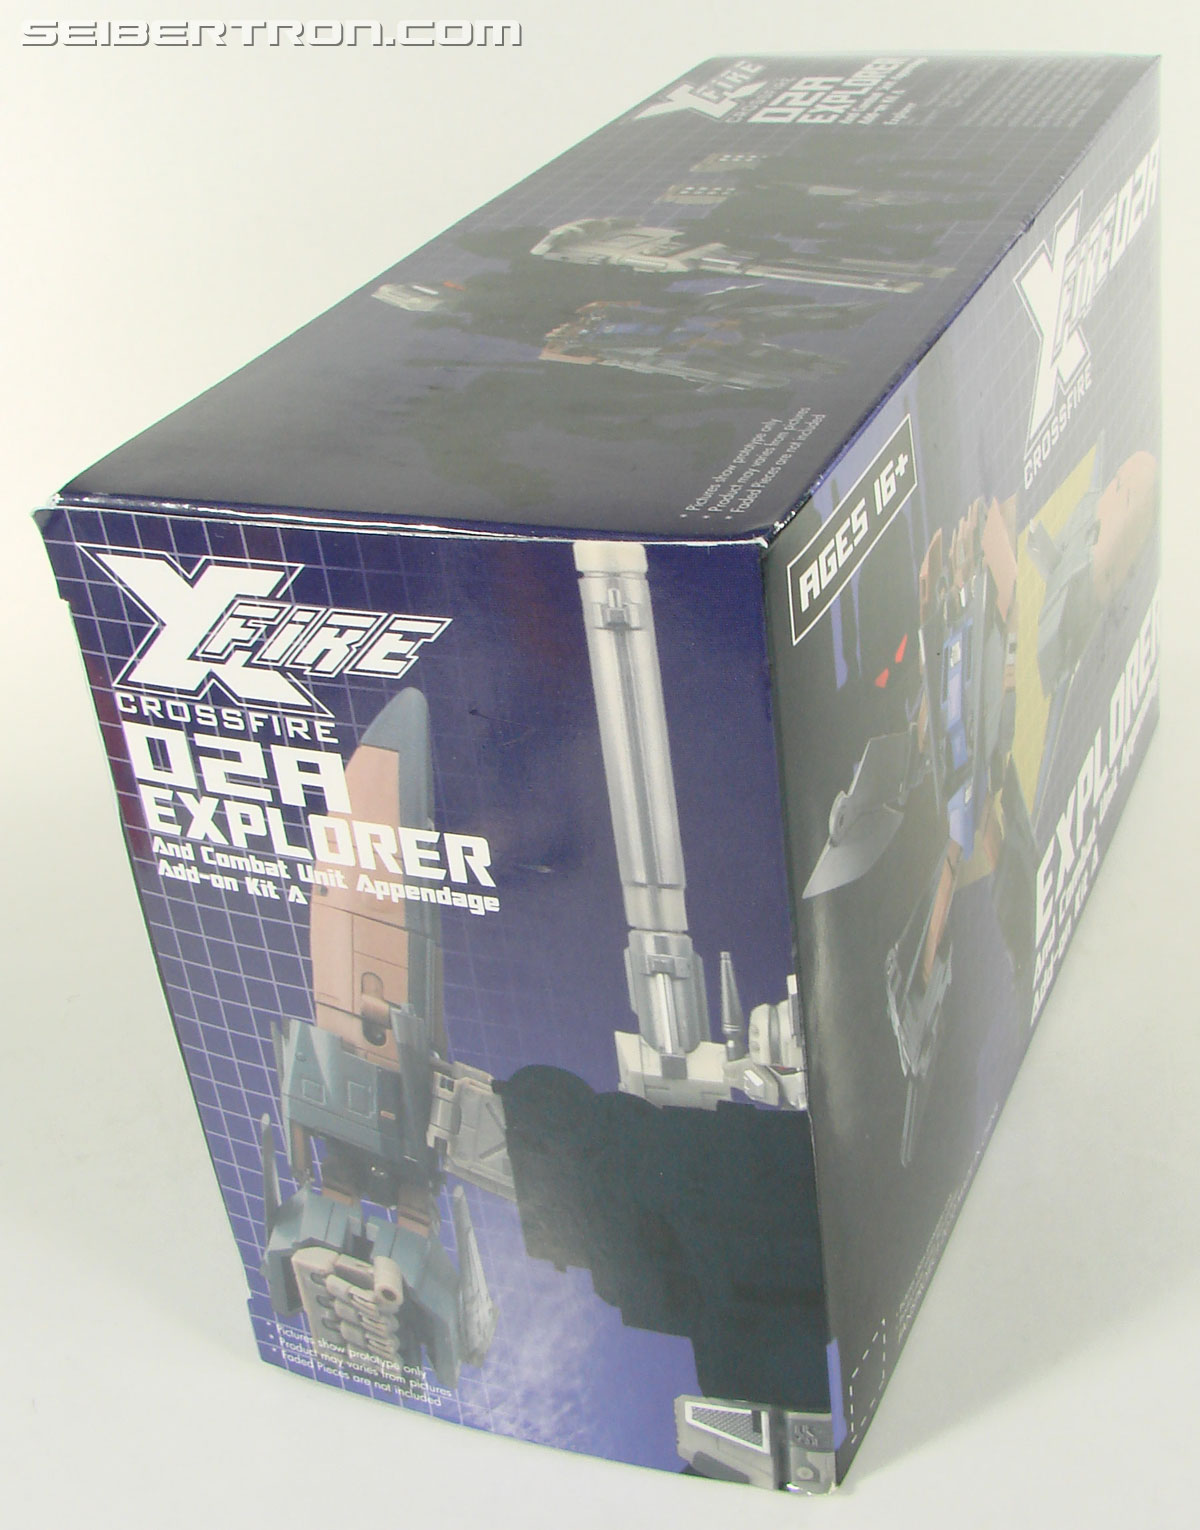 Transformers 3rd Party Products Crossfire 02A Combat Unit Explorer (Blast Off) (Image #4 of 164)